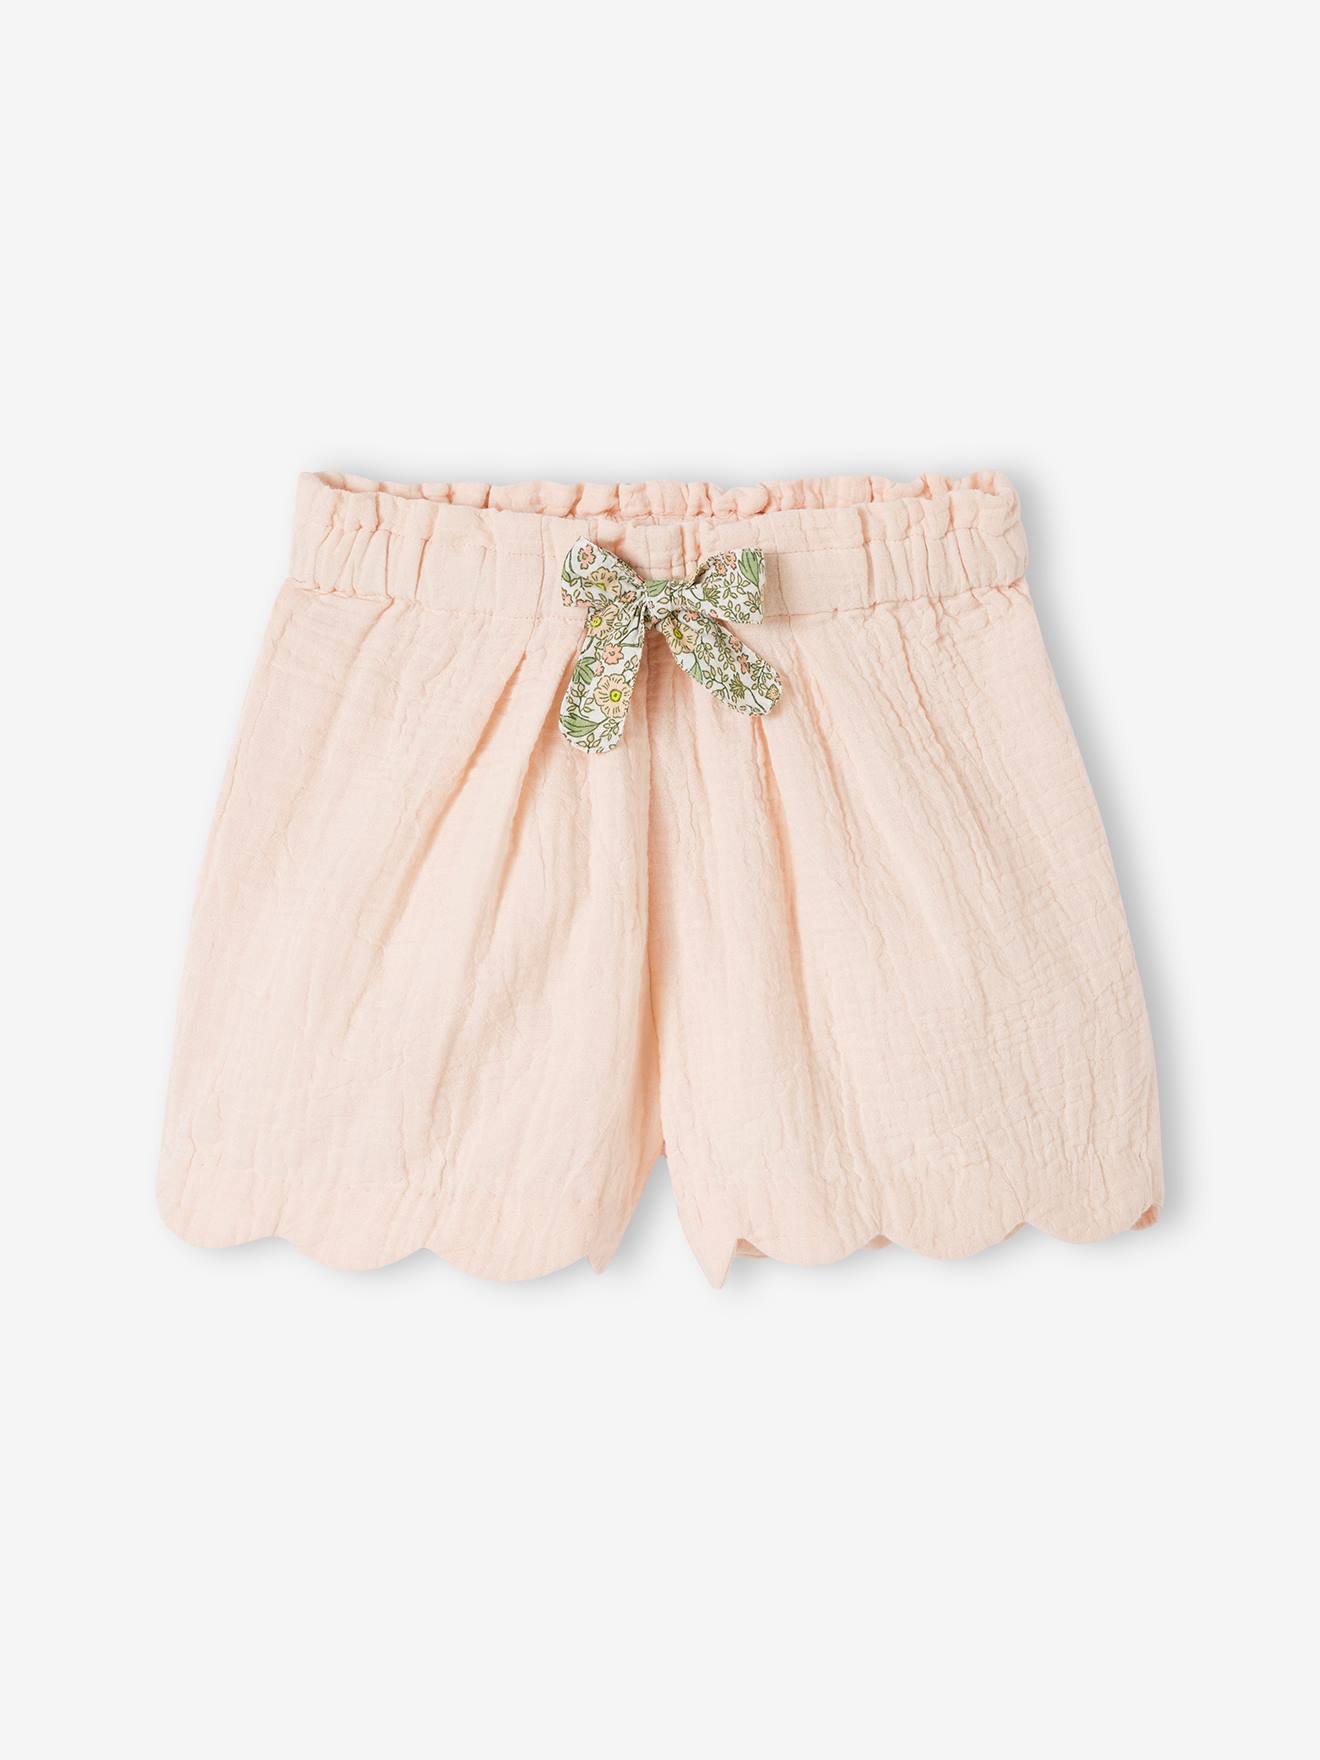 Shorts in Cotton Gauze with Scalloped Trim for Girls nude pink